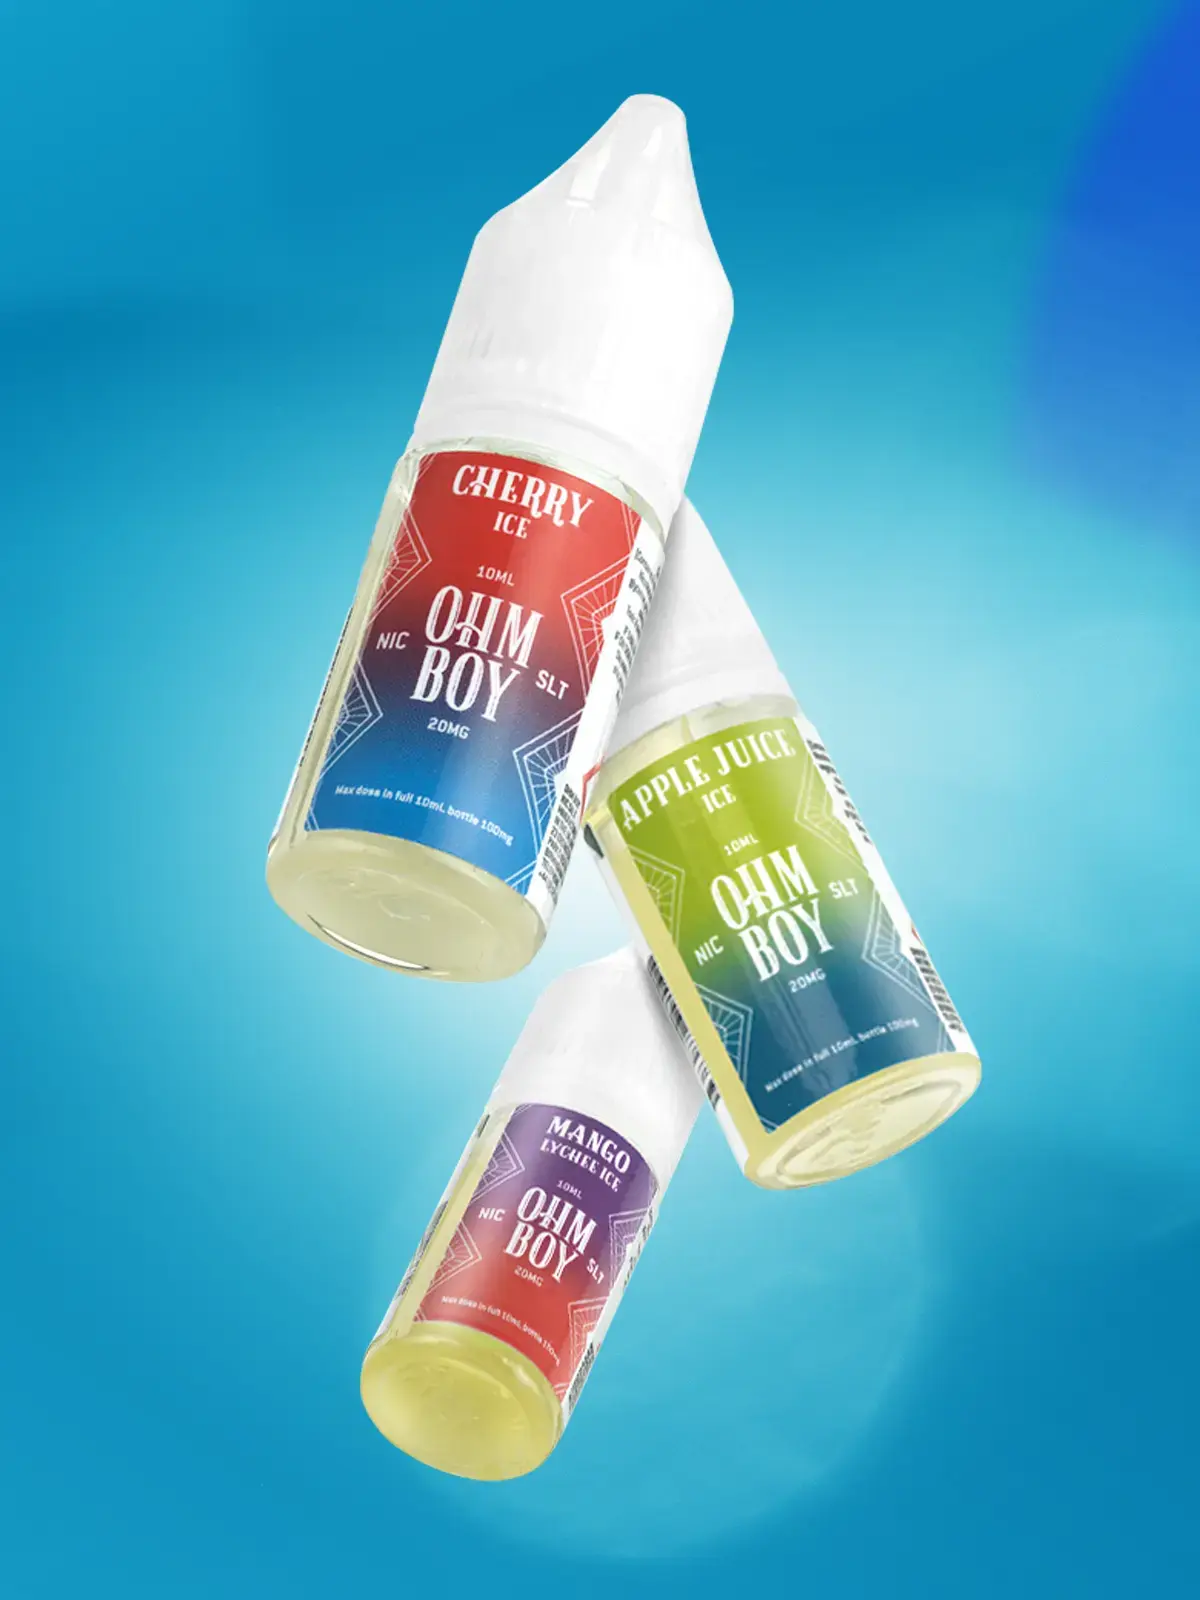 Three bottles of Ohm Boy e-liquid; Cherry Ice, Apple Juice Ice and Mango Lychee Ice floating in front of a blue background